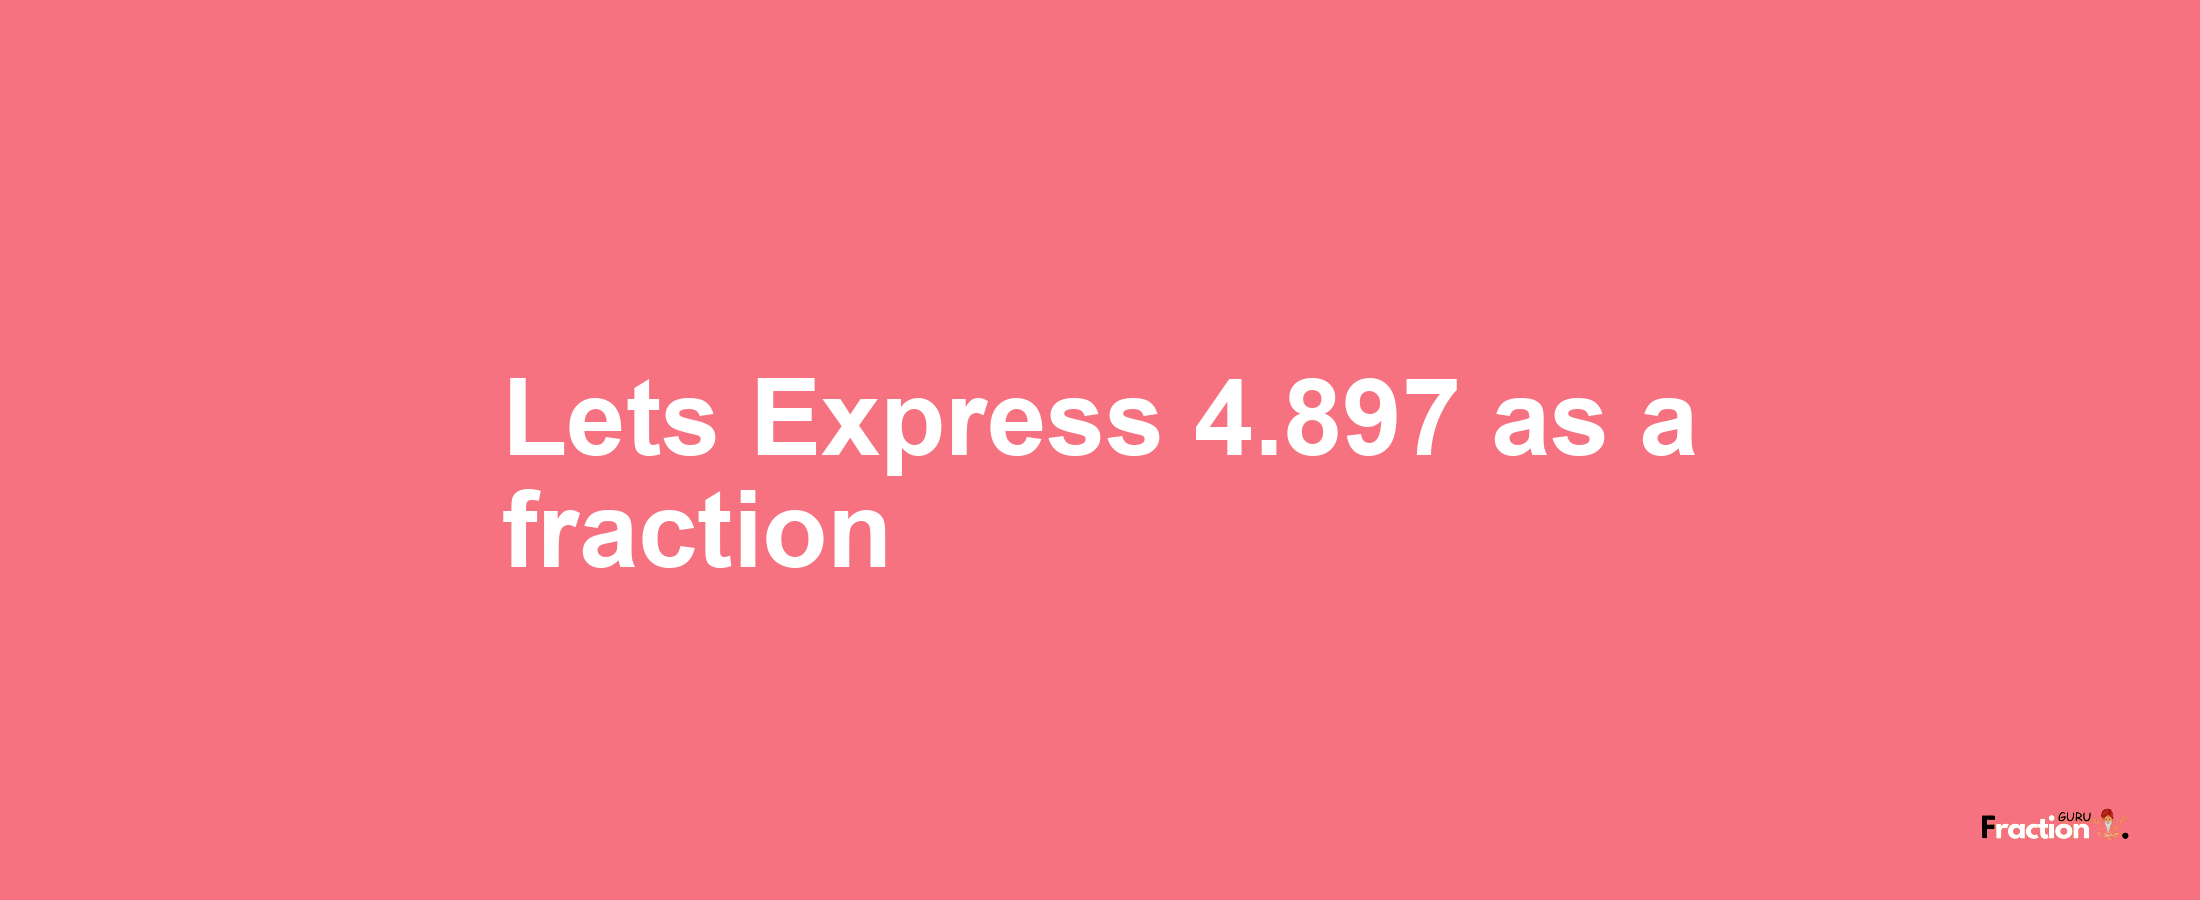 Lets Express 4.897 as afraction